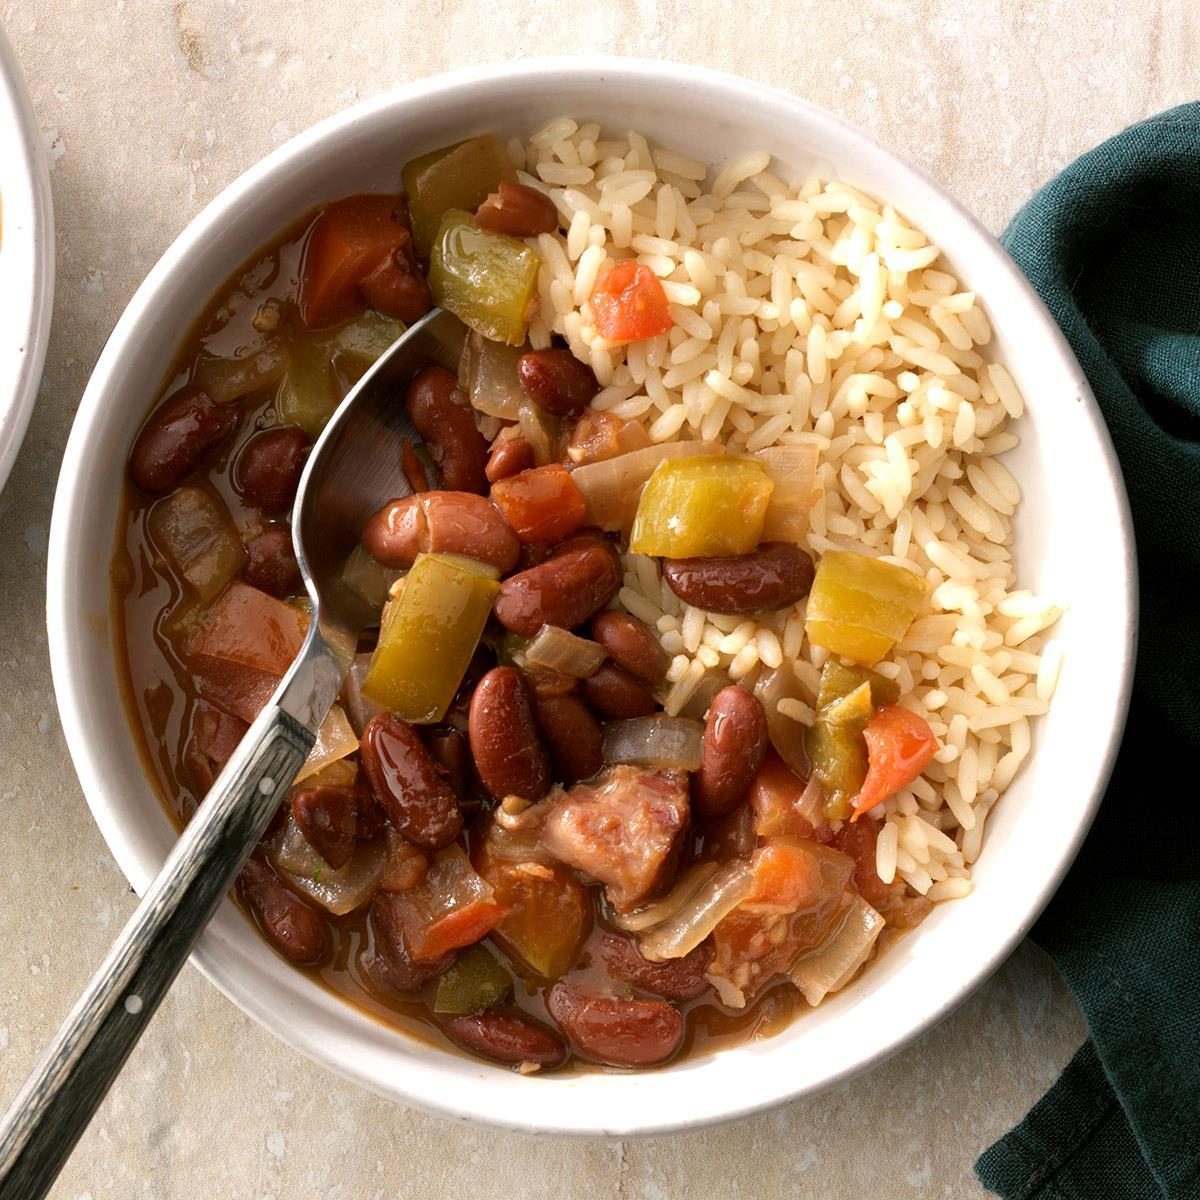 Day 13: All-Day Red Beans & Rice